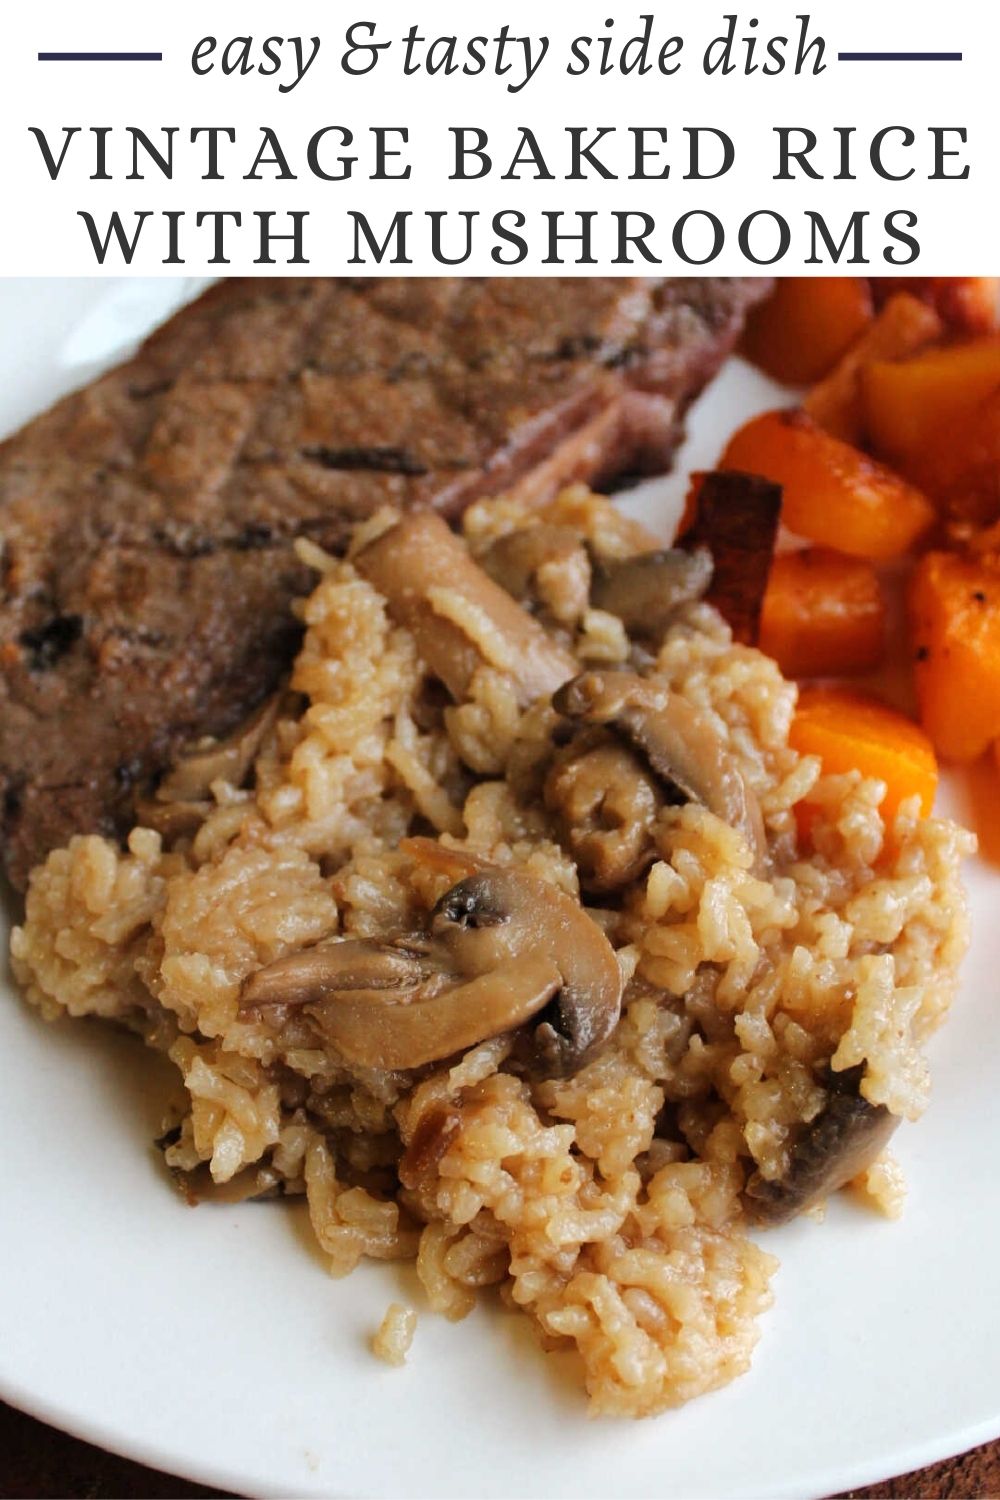 This tasty baked rice recipe has beef broth and mushrooms to make it the perfect savory side dish. It only takes a few minutes to put together and is hands off once it's in the oven. So it is an easy and delicious addition to a dinner menu.